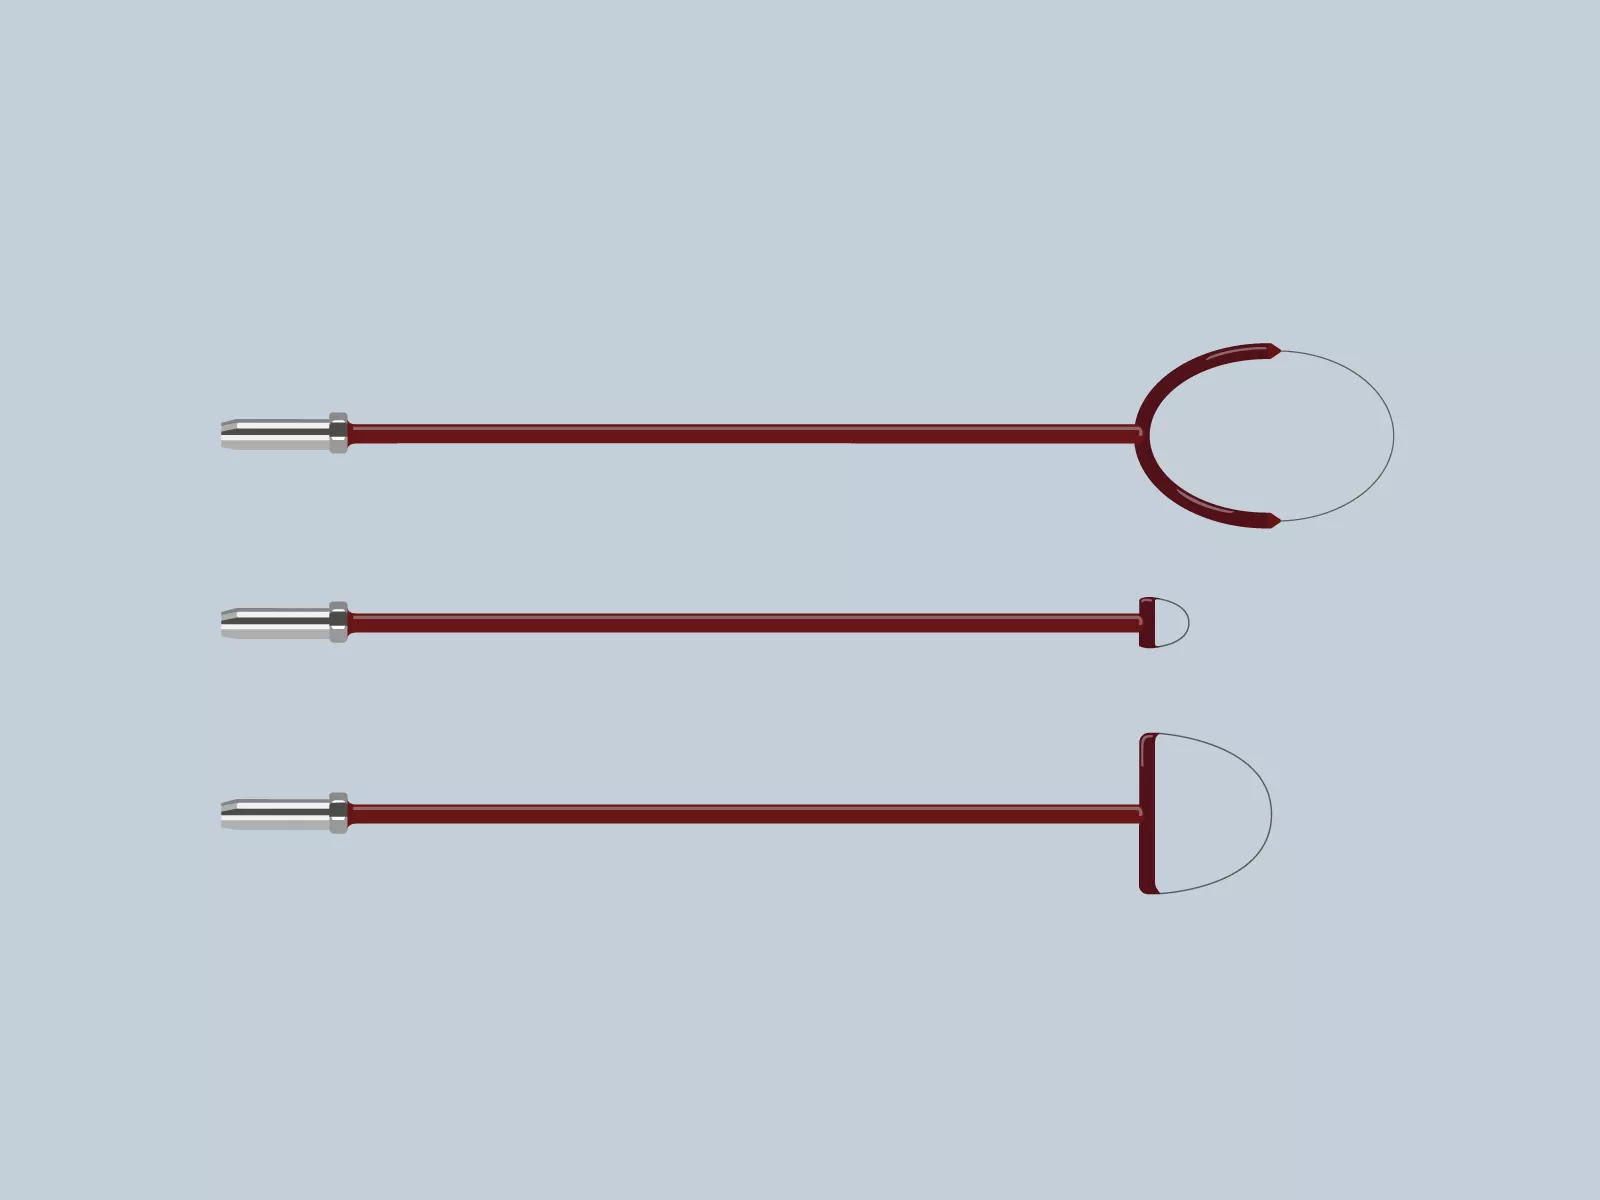 Fine wire for electrodes